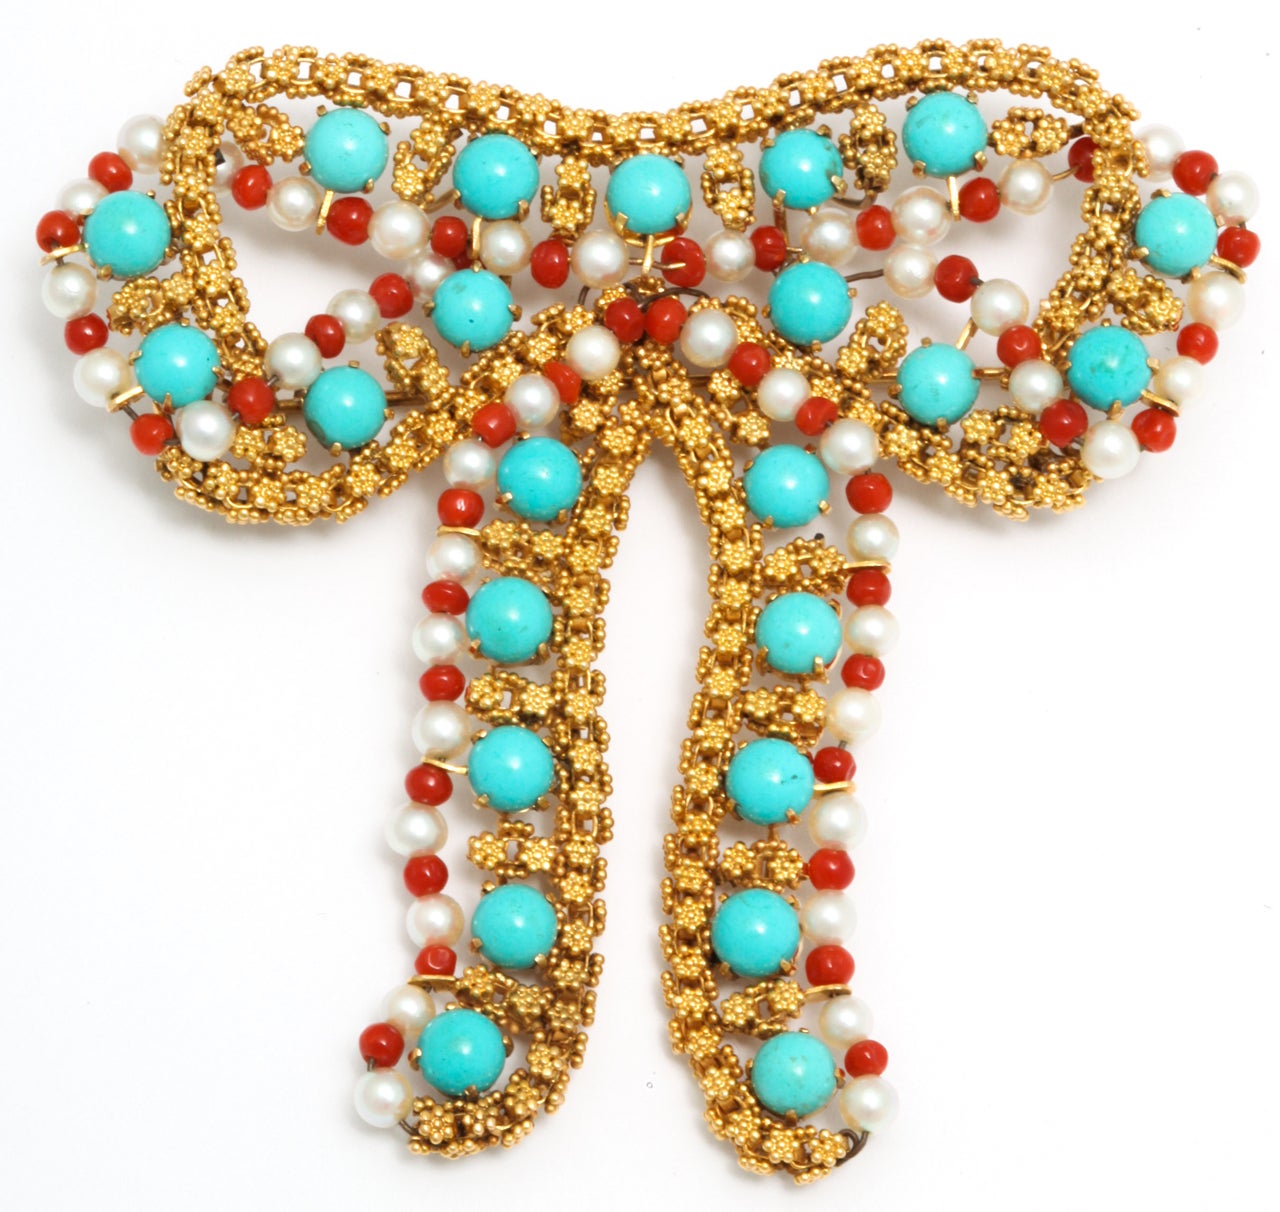 14 kt yellow gold handmade bow brooch embellished with very high quality turquoise balls and coral balls and pearls exhibiting beautiful gold workmanship